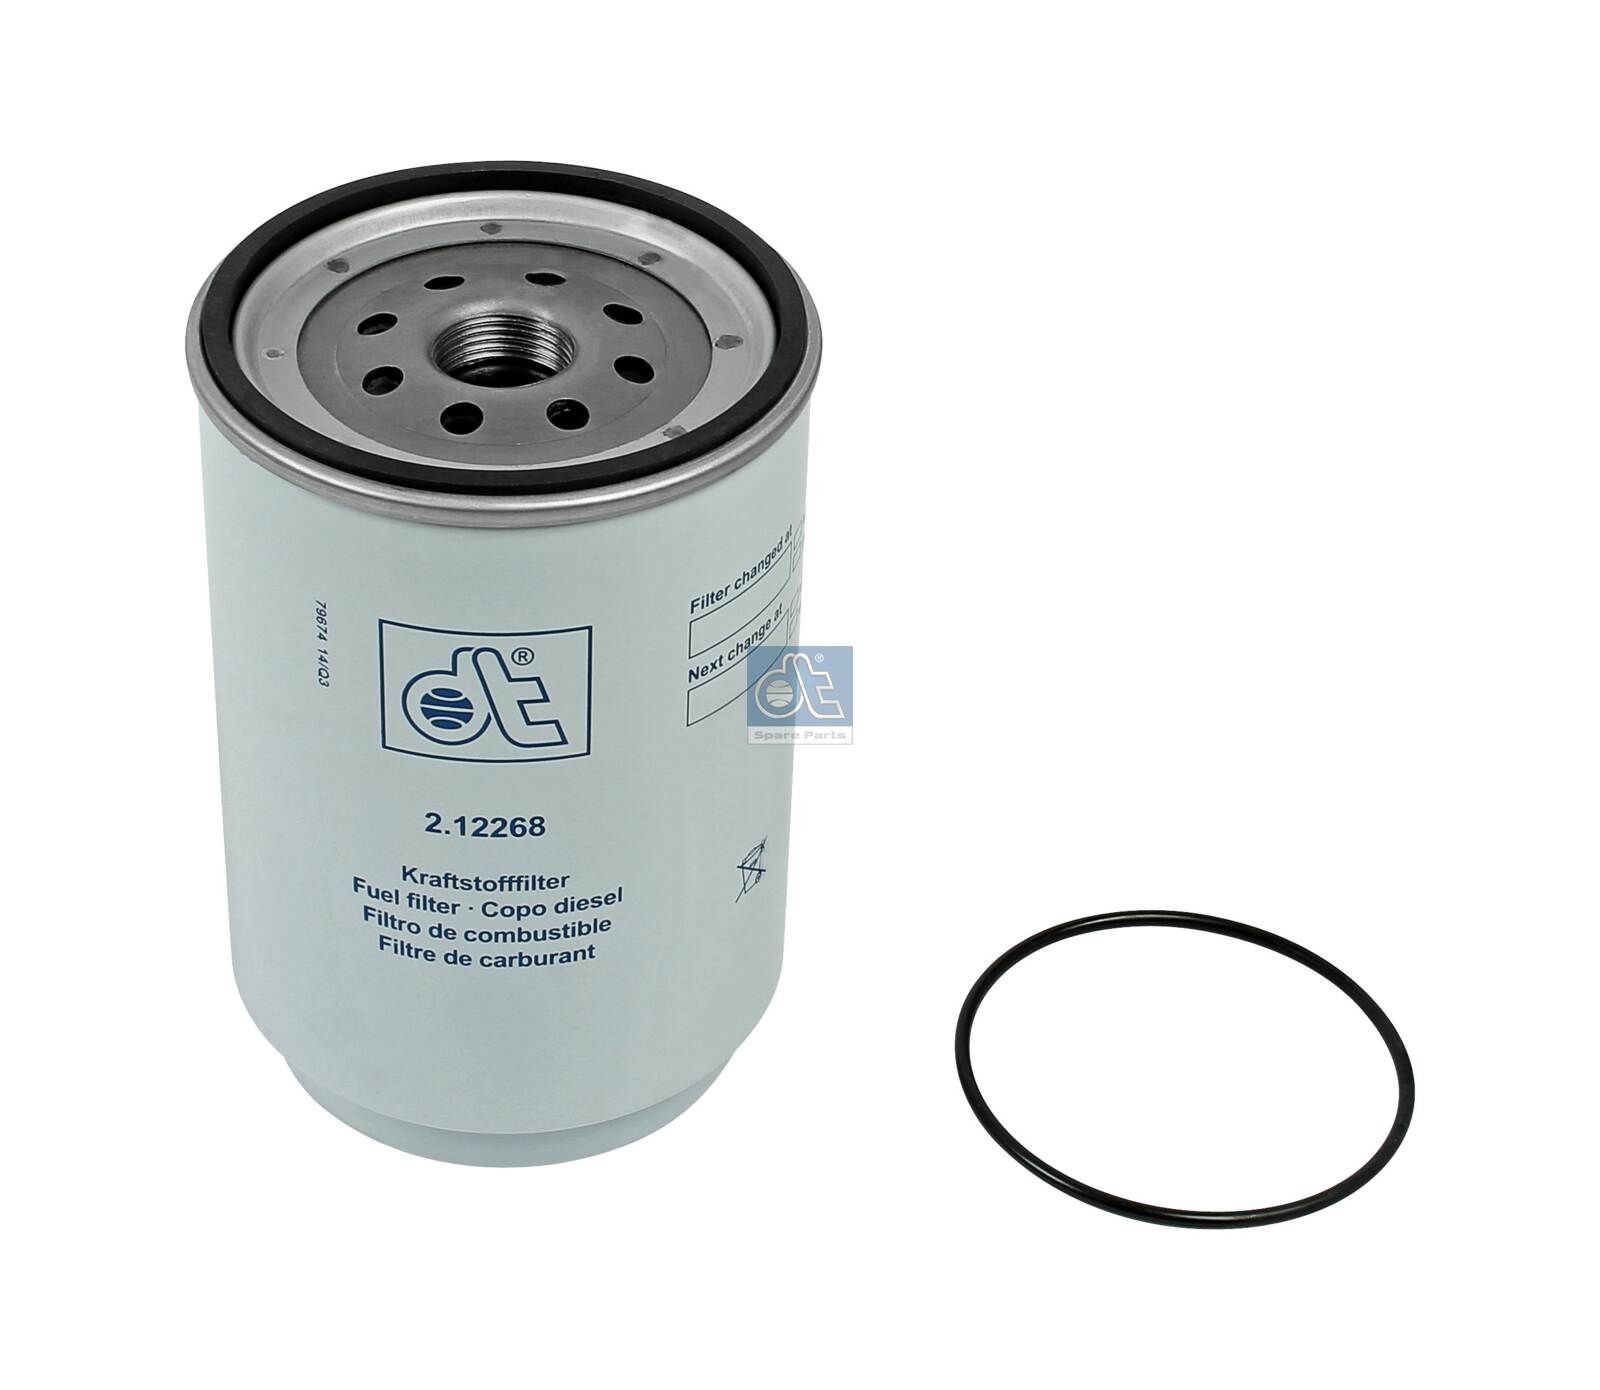 WK 11 001 x DT Spare Parts 2.12268 Fuel filter 20 745 605